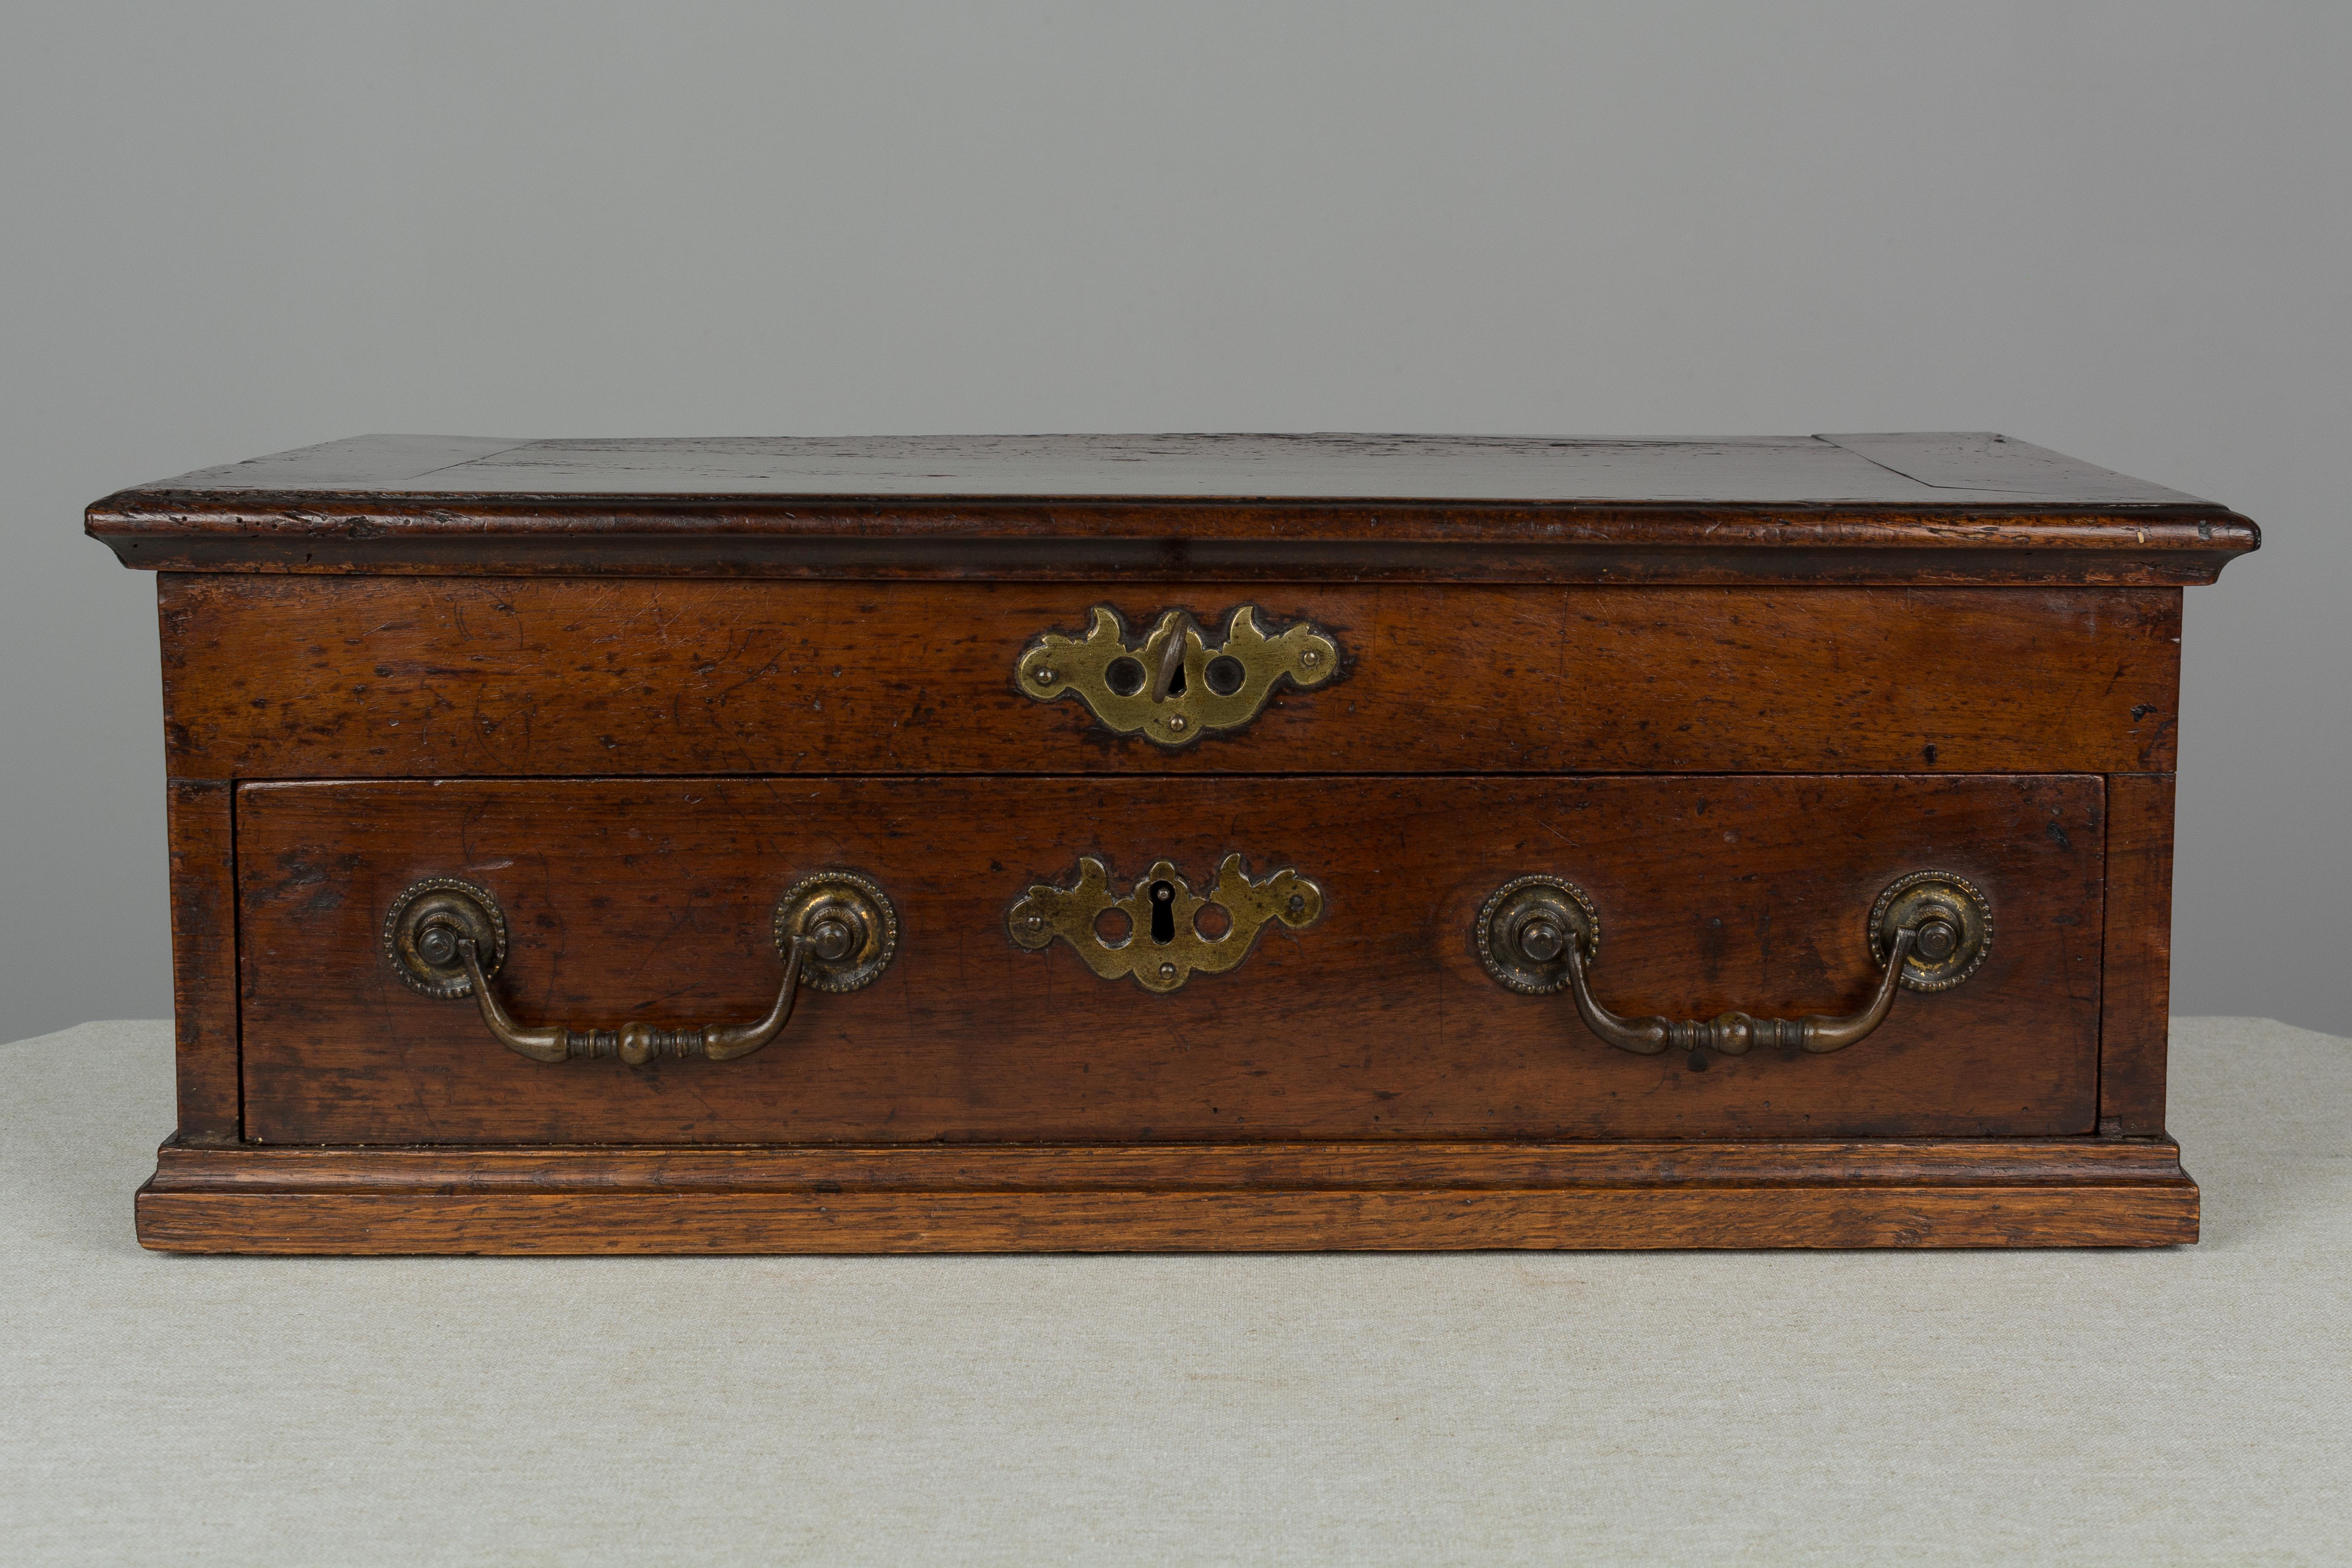 An 18th century French walnut box with a dovetailed drawer and hinged lid, opening to a divided interior with two small removable compartments. Original brass hardware with working lock and new key. Original paper label affixed to the inside of lid